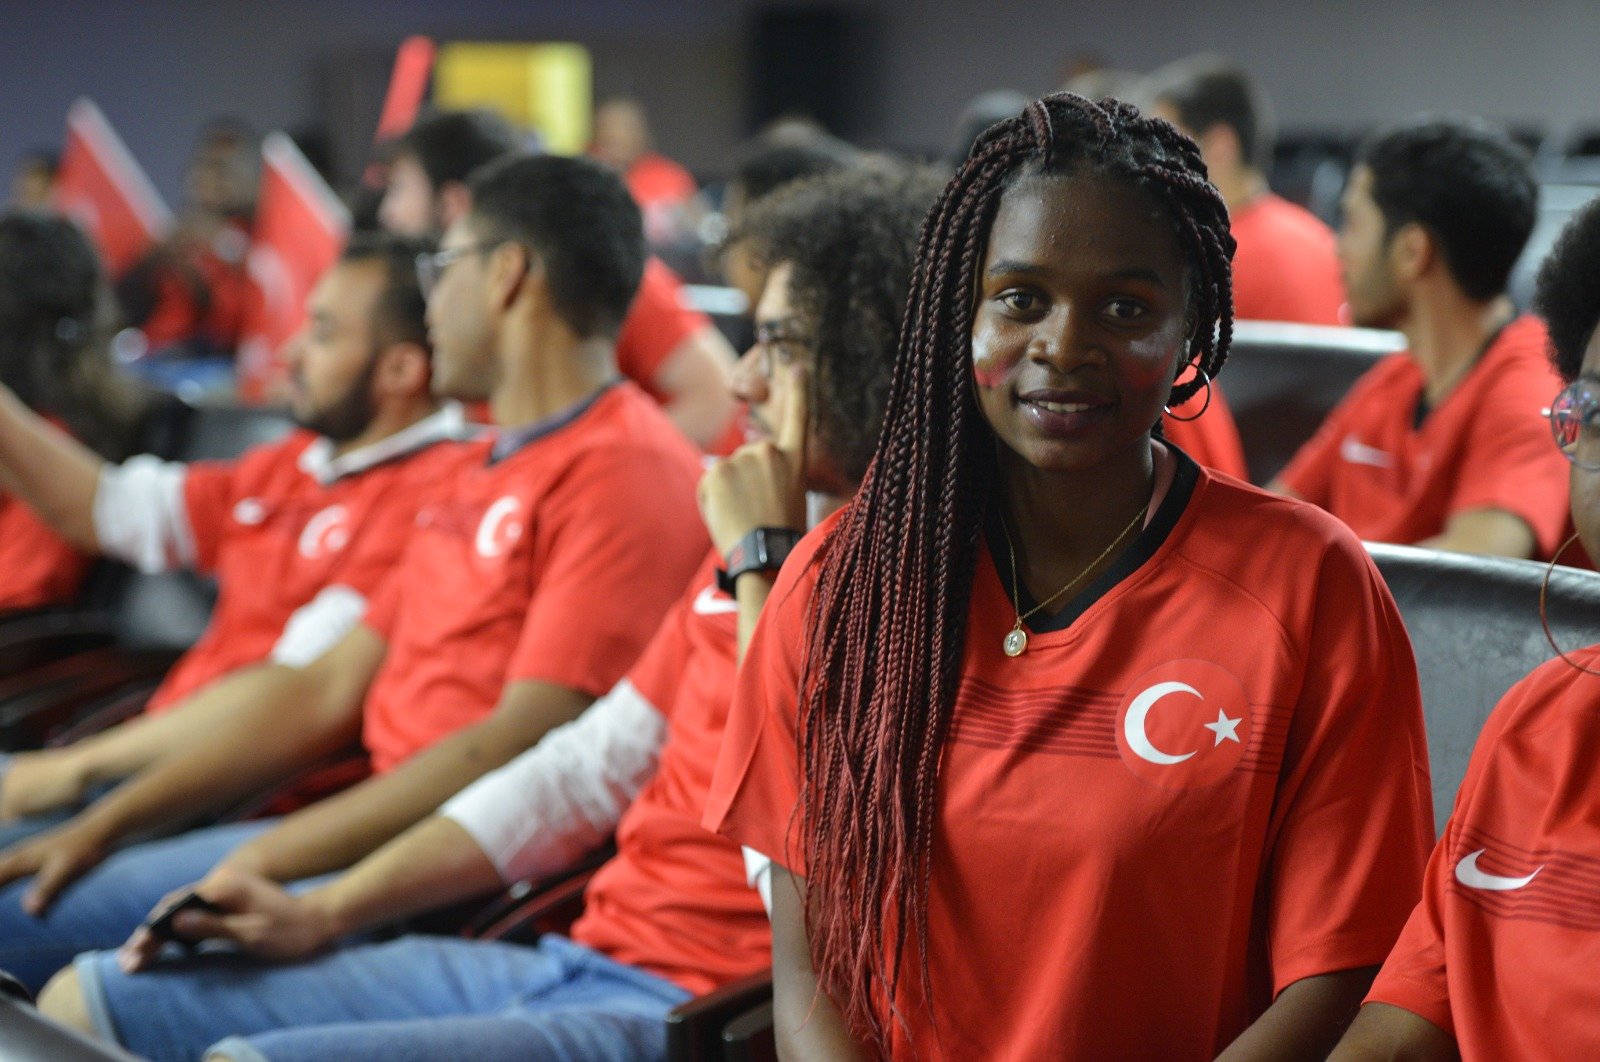 An international student taking courses in Turkey on a scholarship poses during a YTB activity. (Courtesy of YTB)